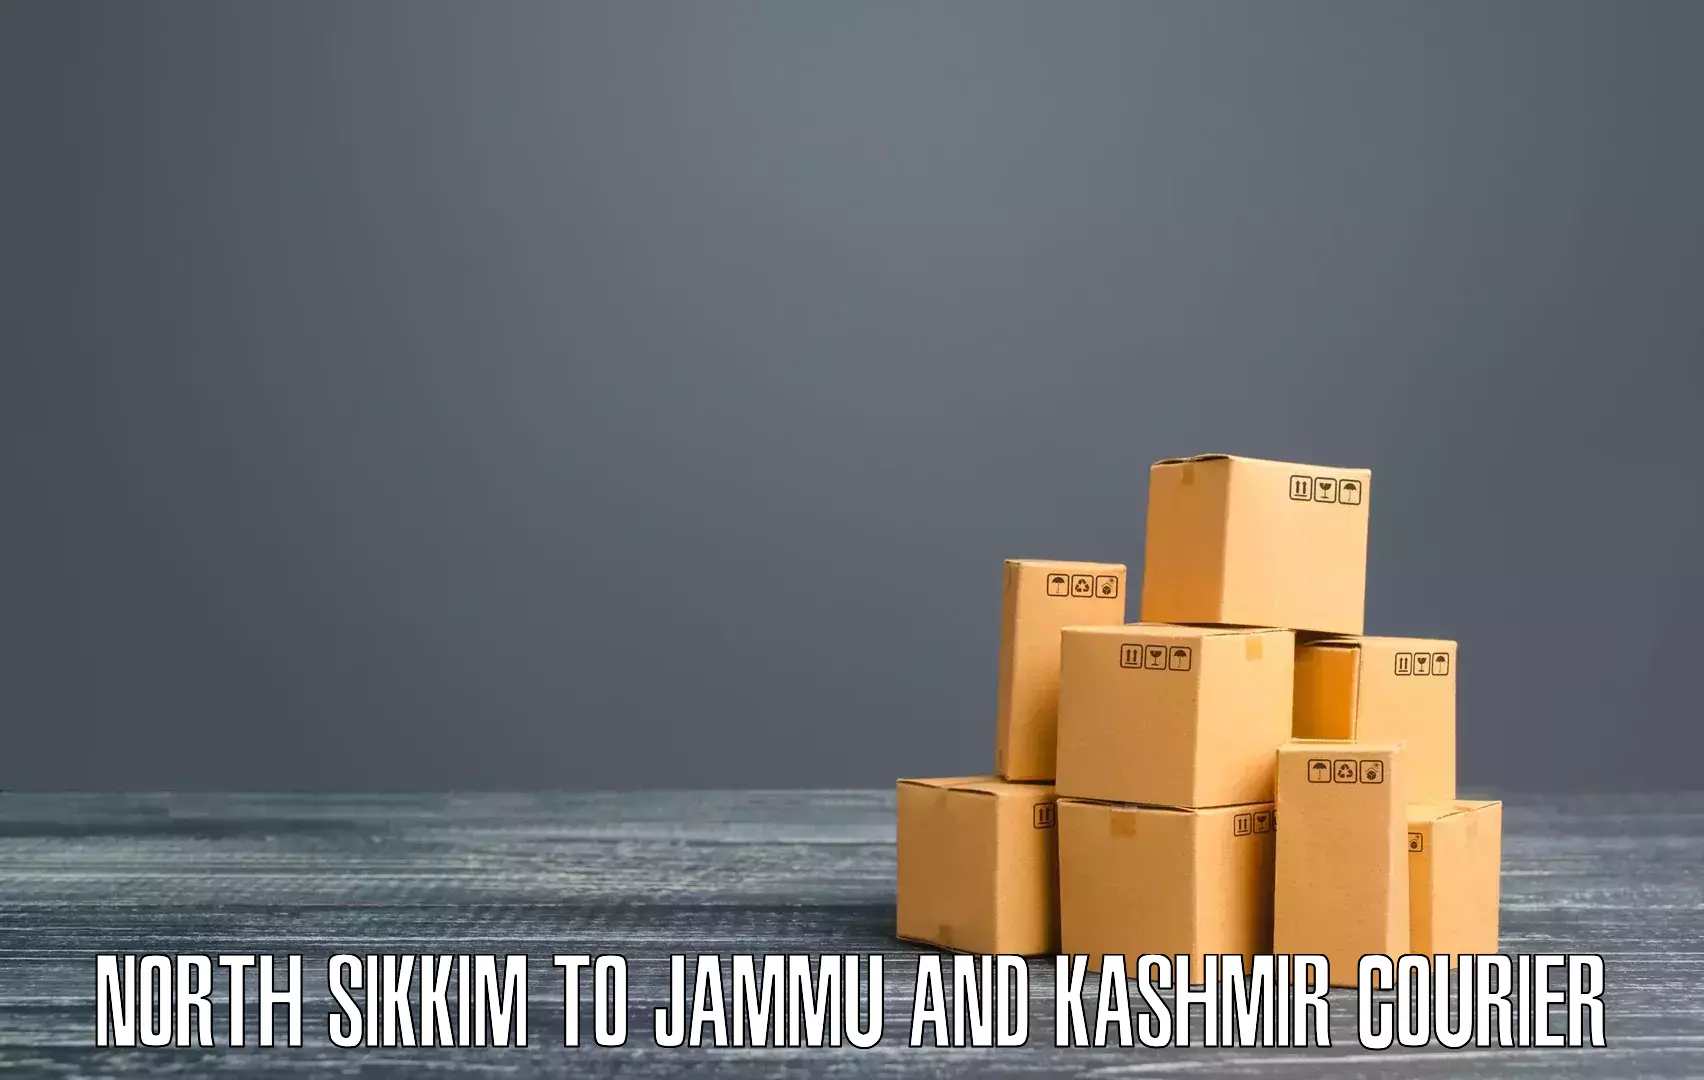 Logistics efficiency in North Sikkim to Jammu and Kashmir